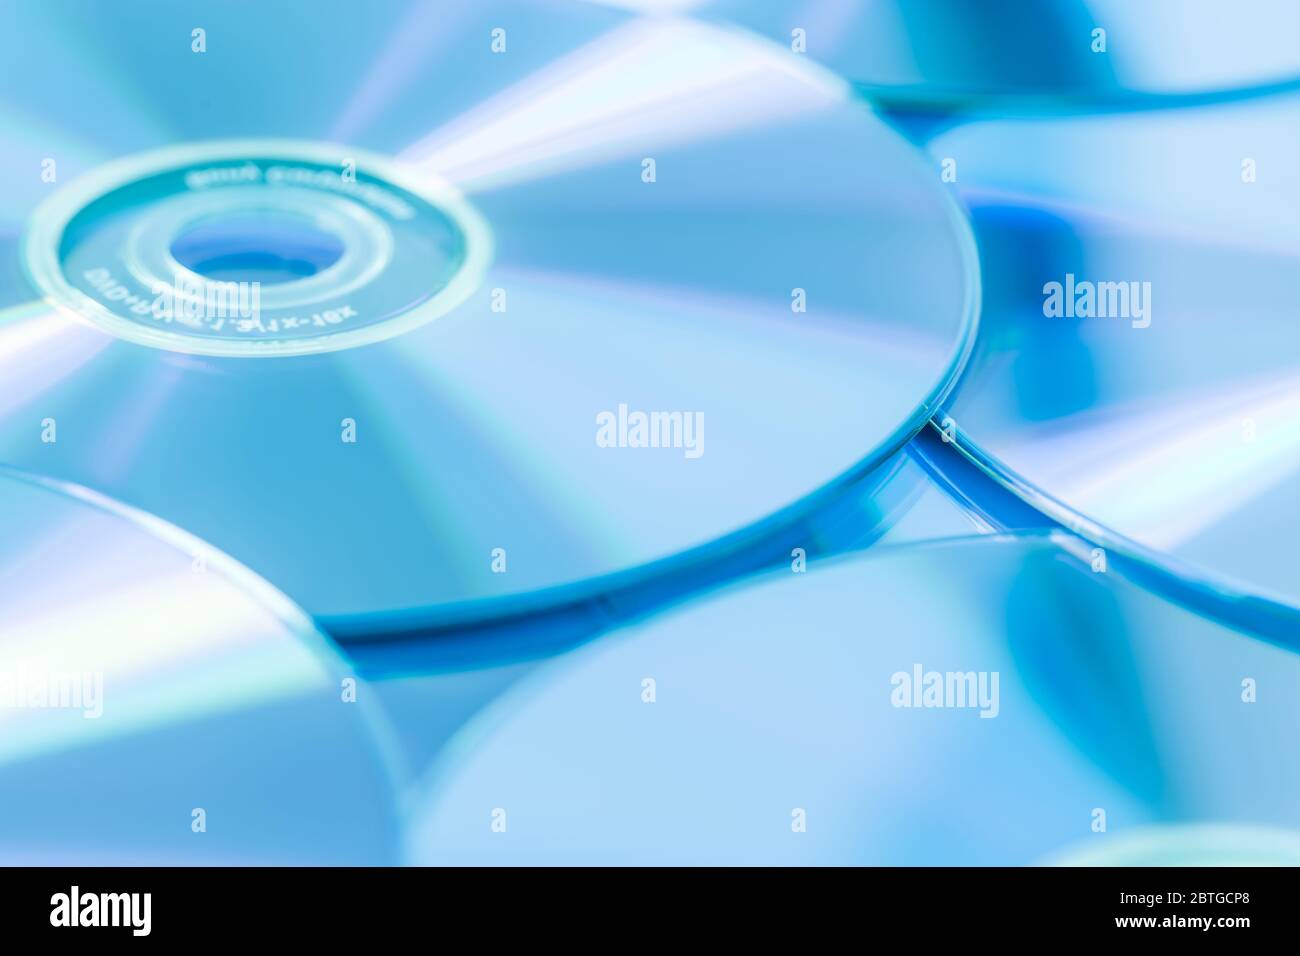 Stack of CD or DVD in blue tone as background. Soft focus. Stock Photo